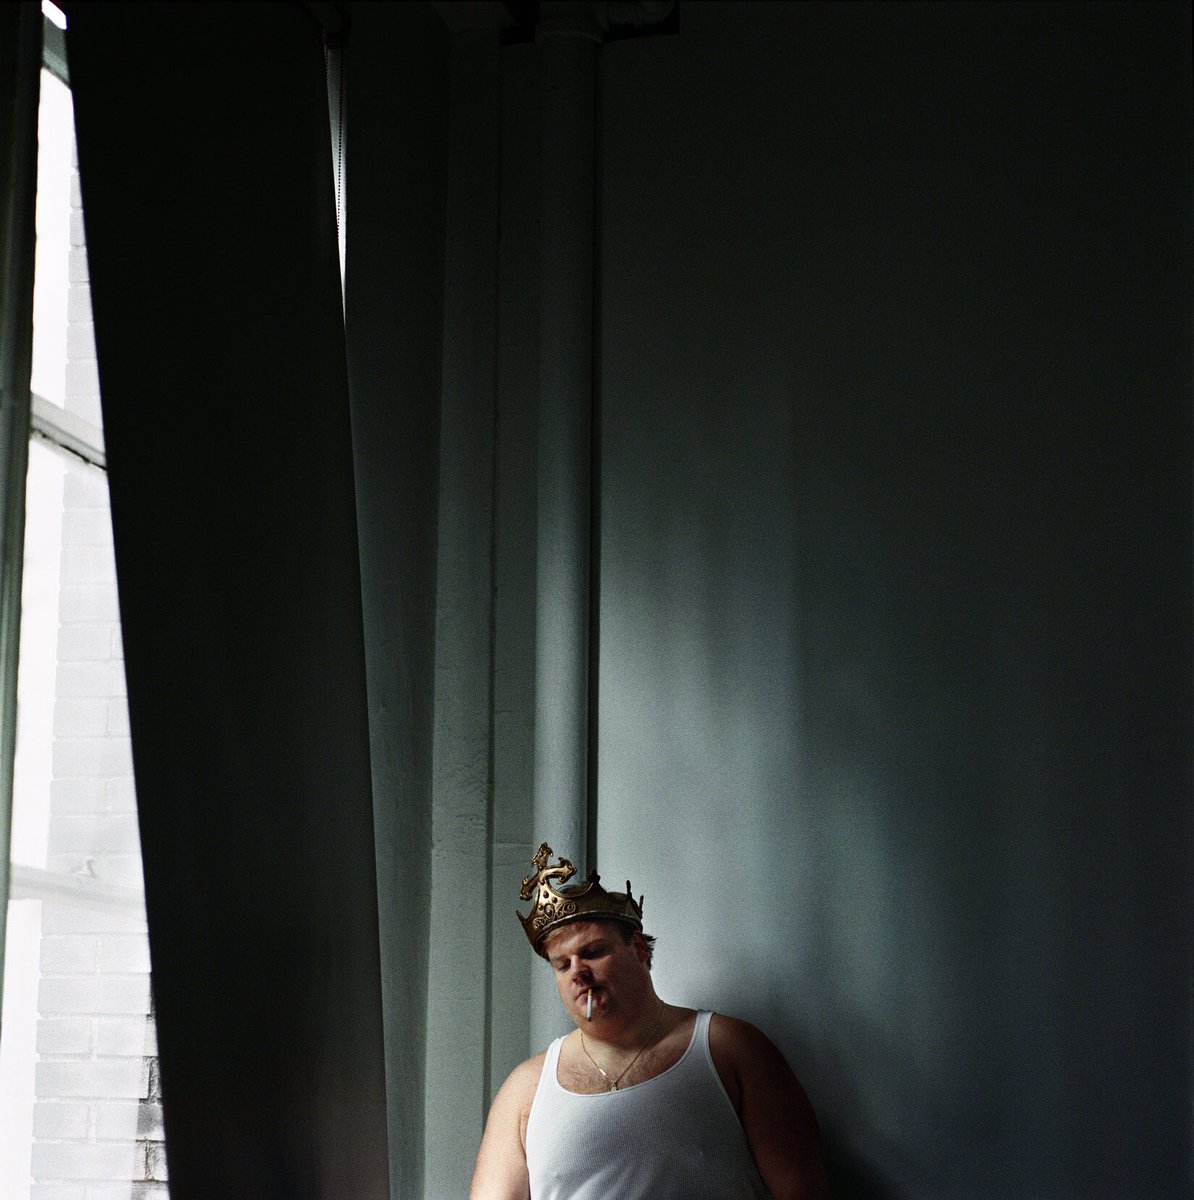 Will always love this 1994 photo of CHRIS FARLEY 📷 by Chris Buck